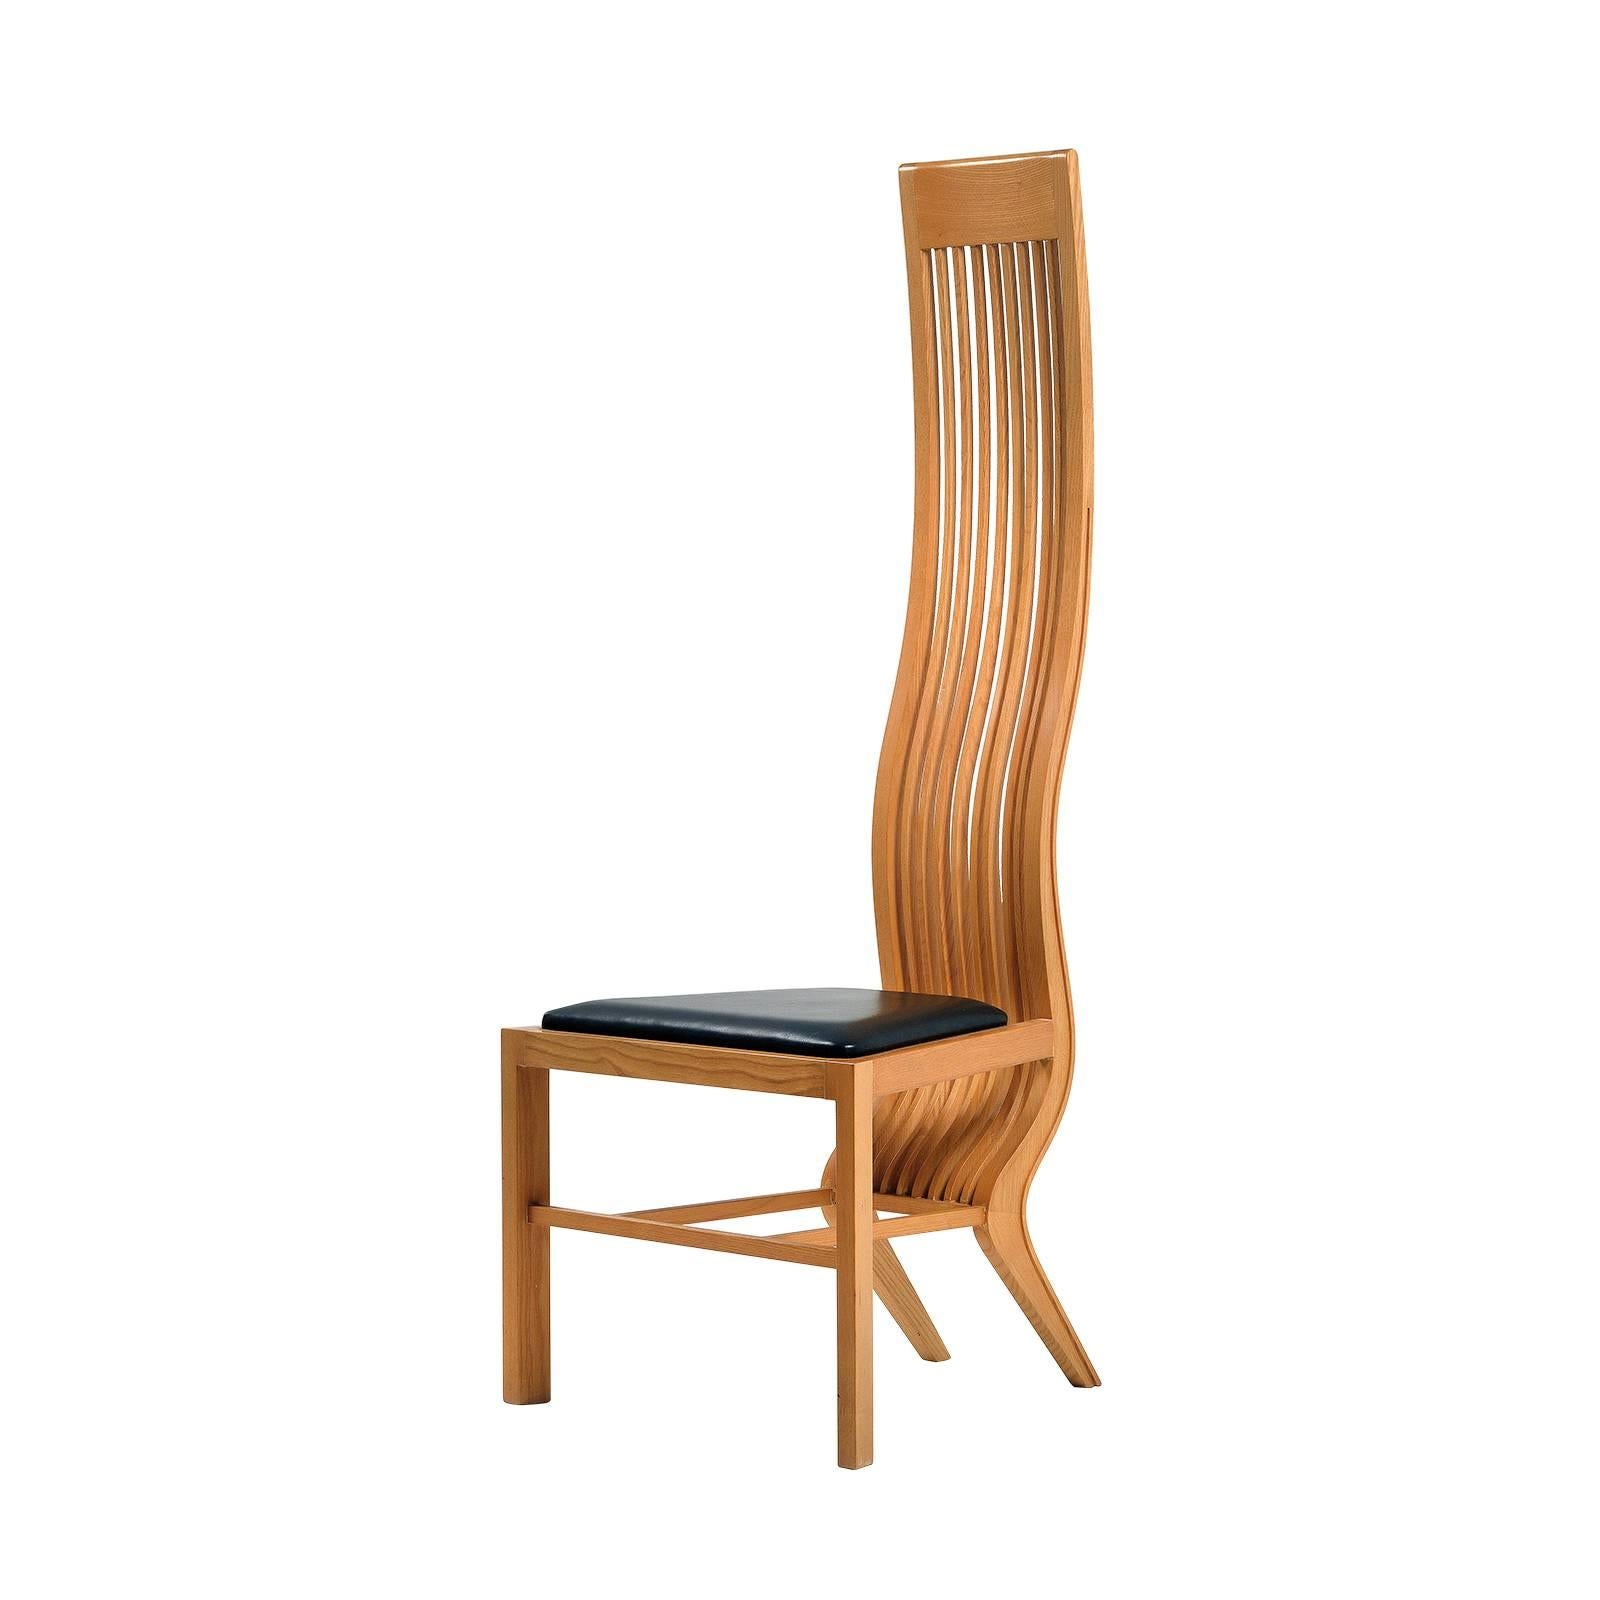 Rare Version of Monroe Dining Chair by Arata Isozaki, 1972 For Sale